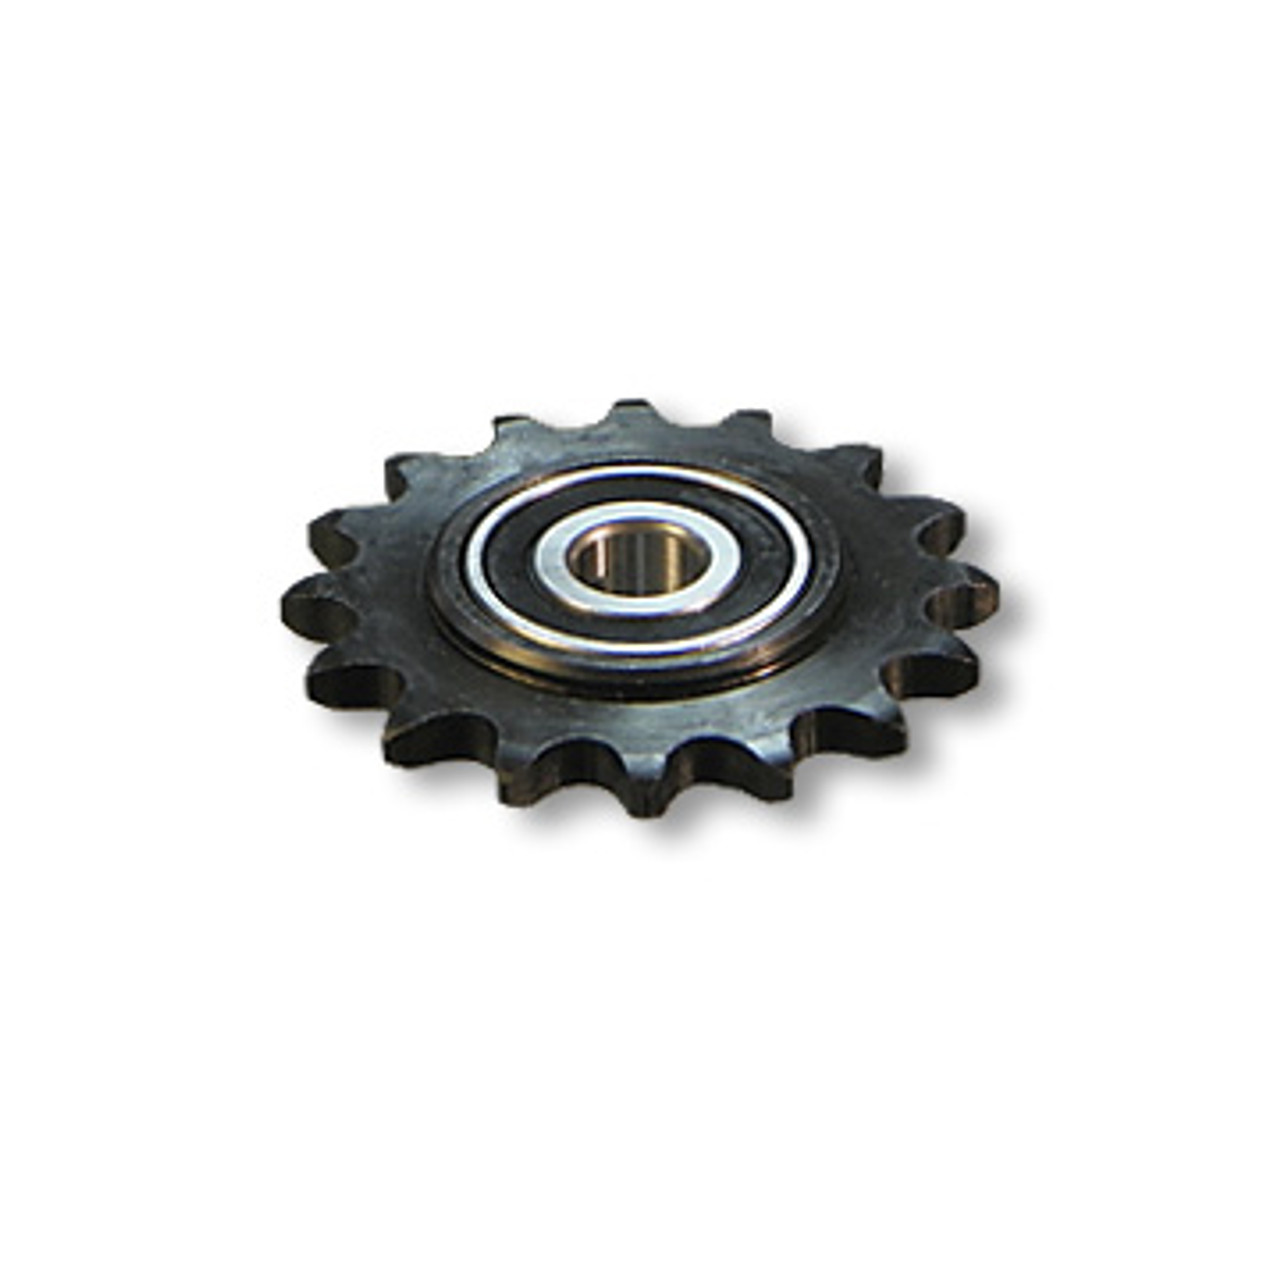 Idler/Tensioner Sprocket Steel, #41 Chain, 1/2" ID Precision Bearing, 16 Tooth